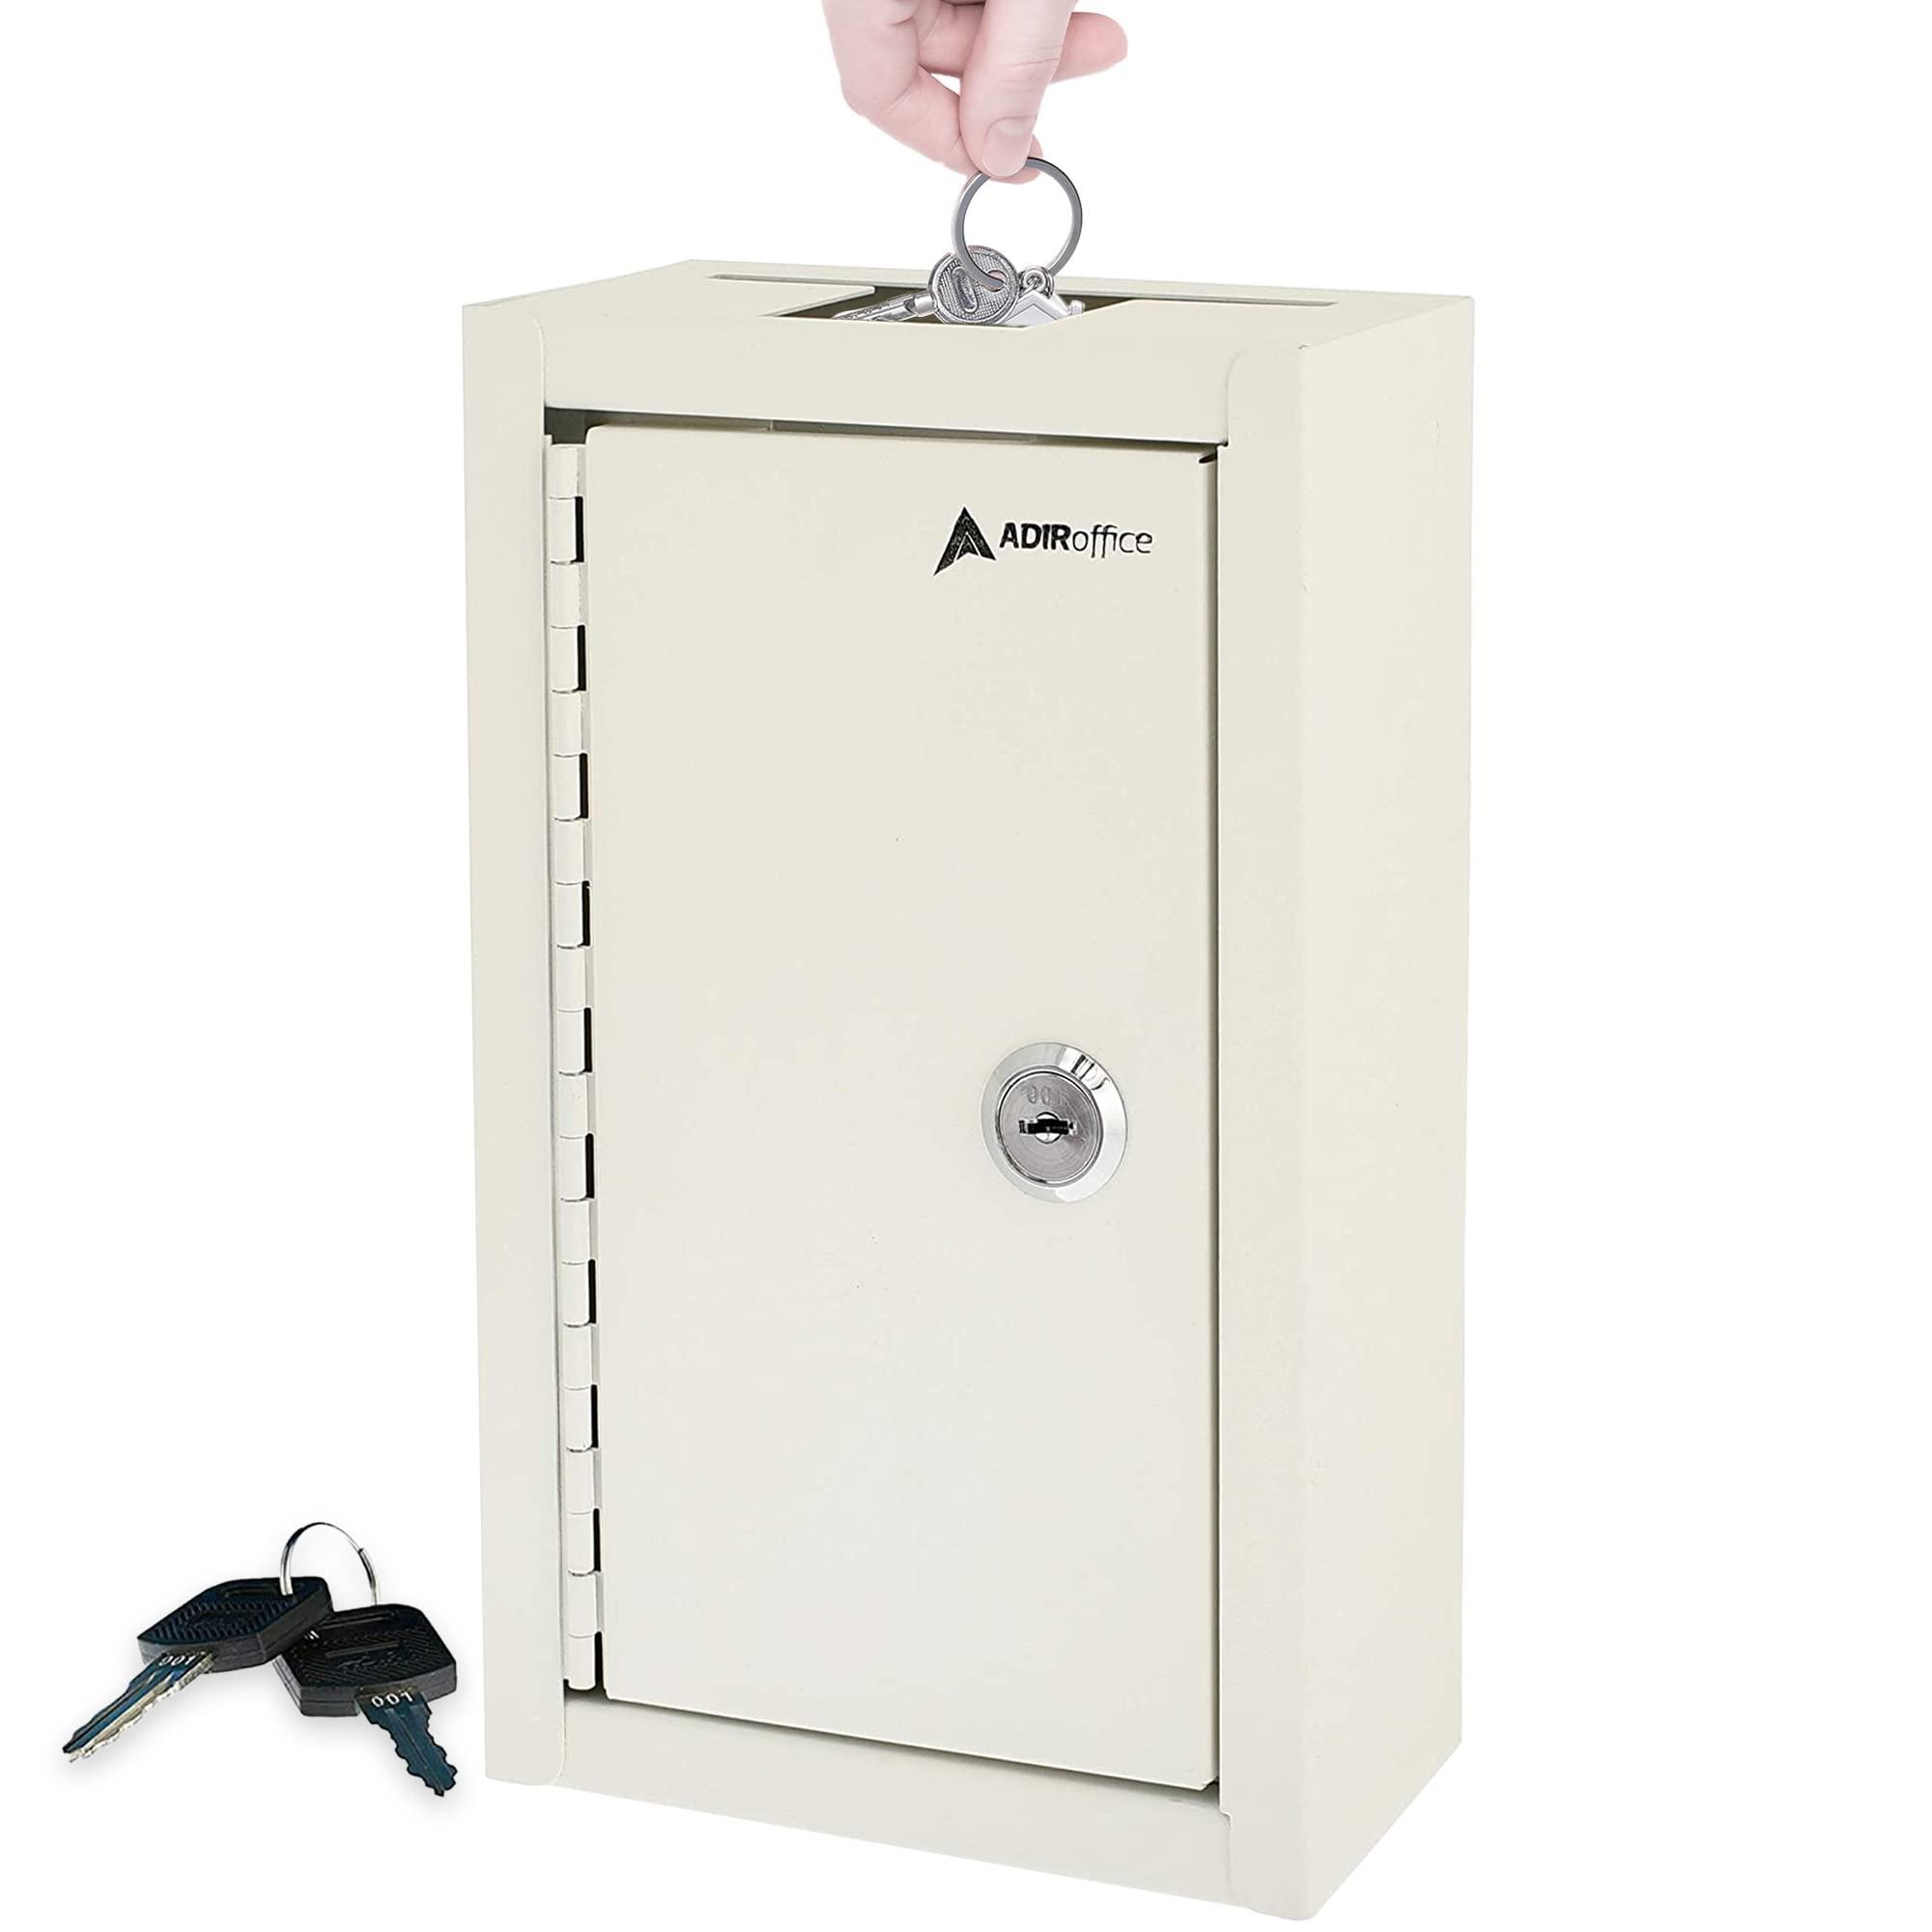 AdirOffice Large Key Drop Box - Large capacity commercial grade Storage Box - Safe & Secure Parcel & Packages - for Home & Business Use (White)